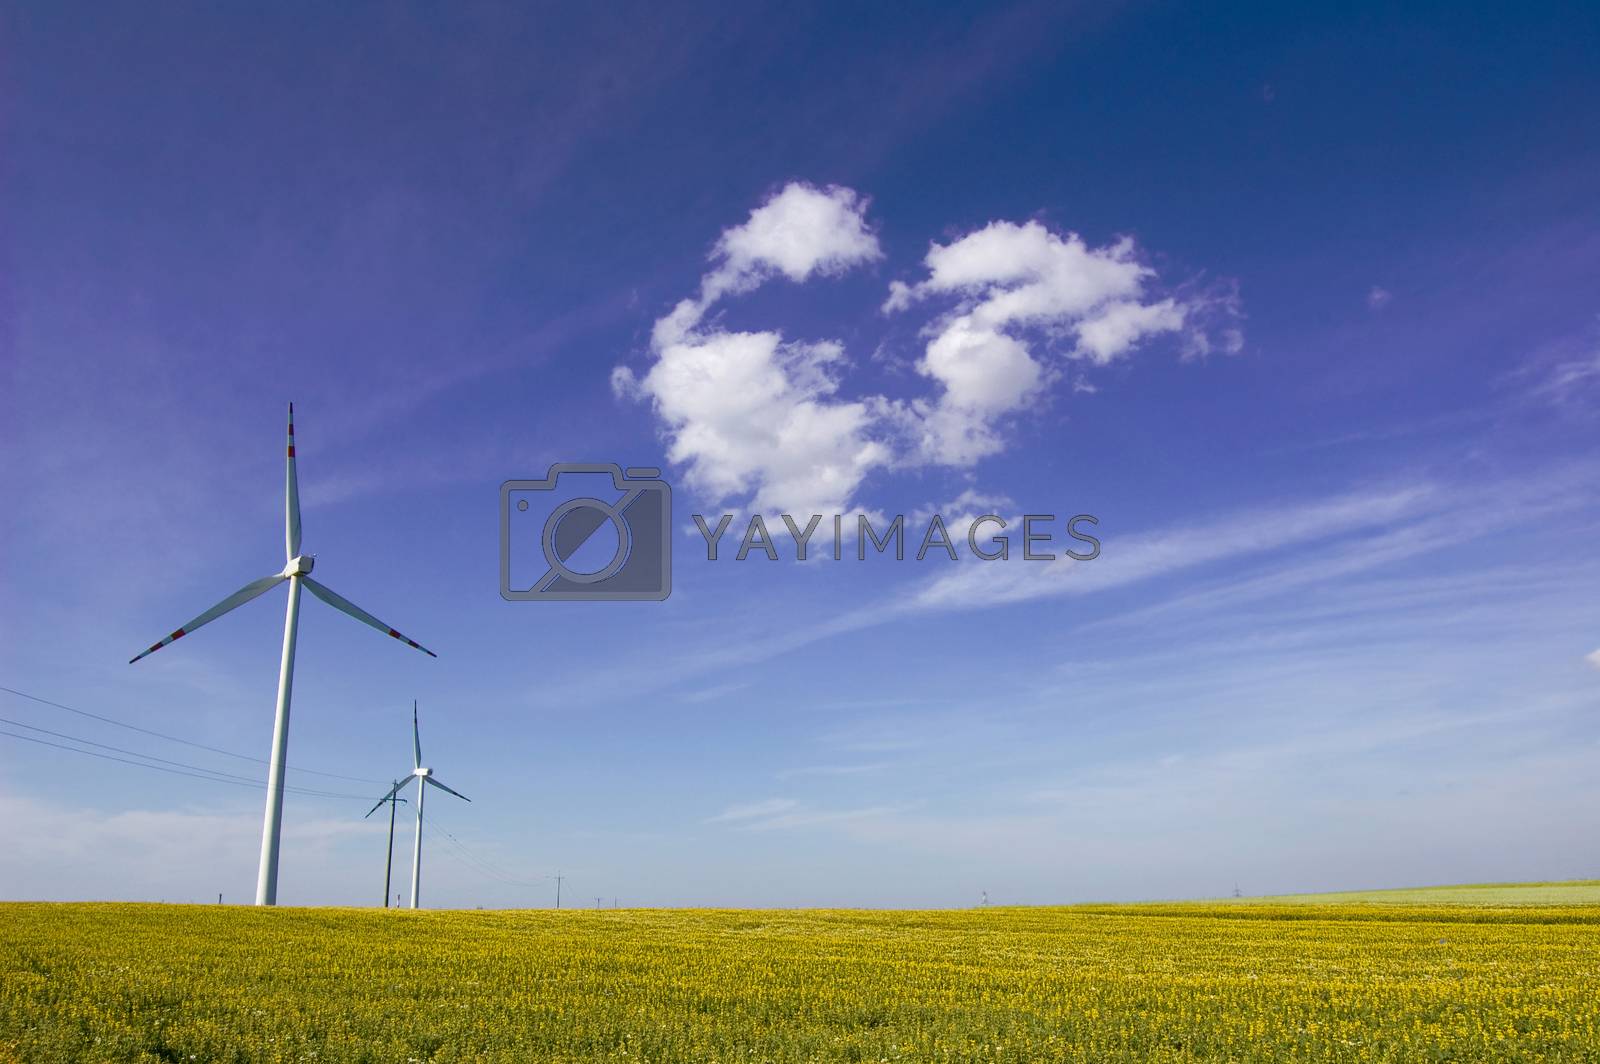 Royalty free image of Windmill conceptual image. by satariel